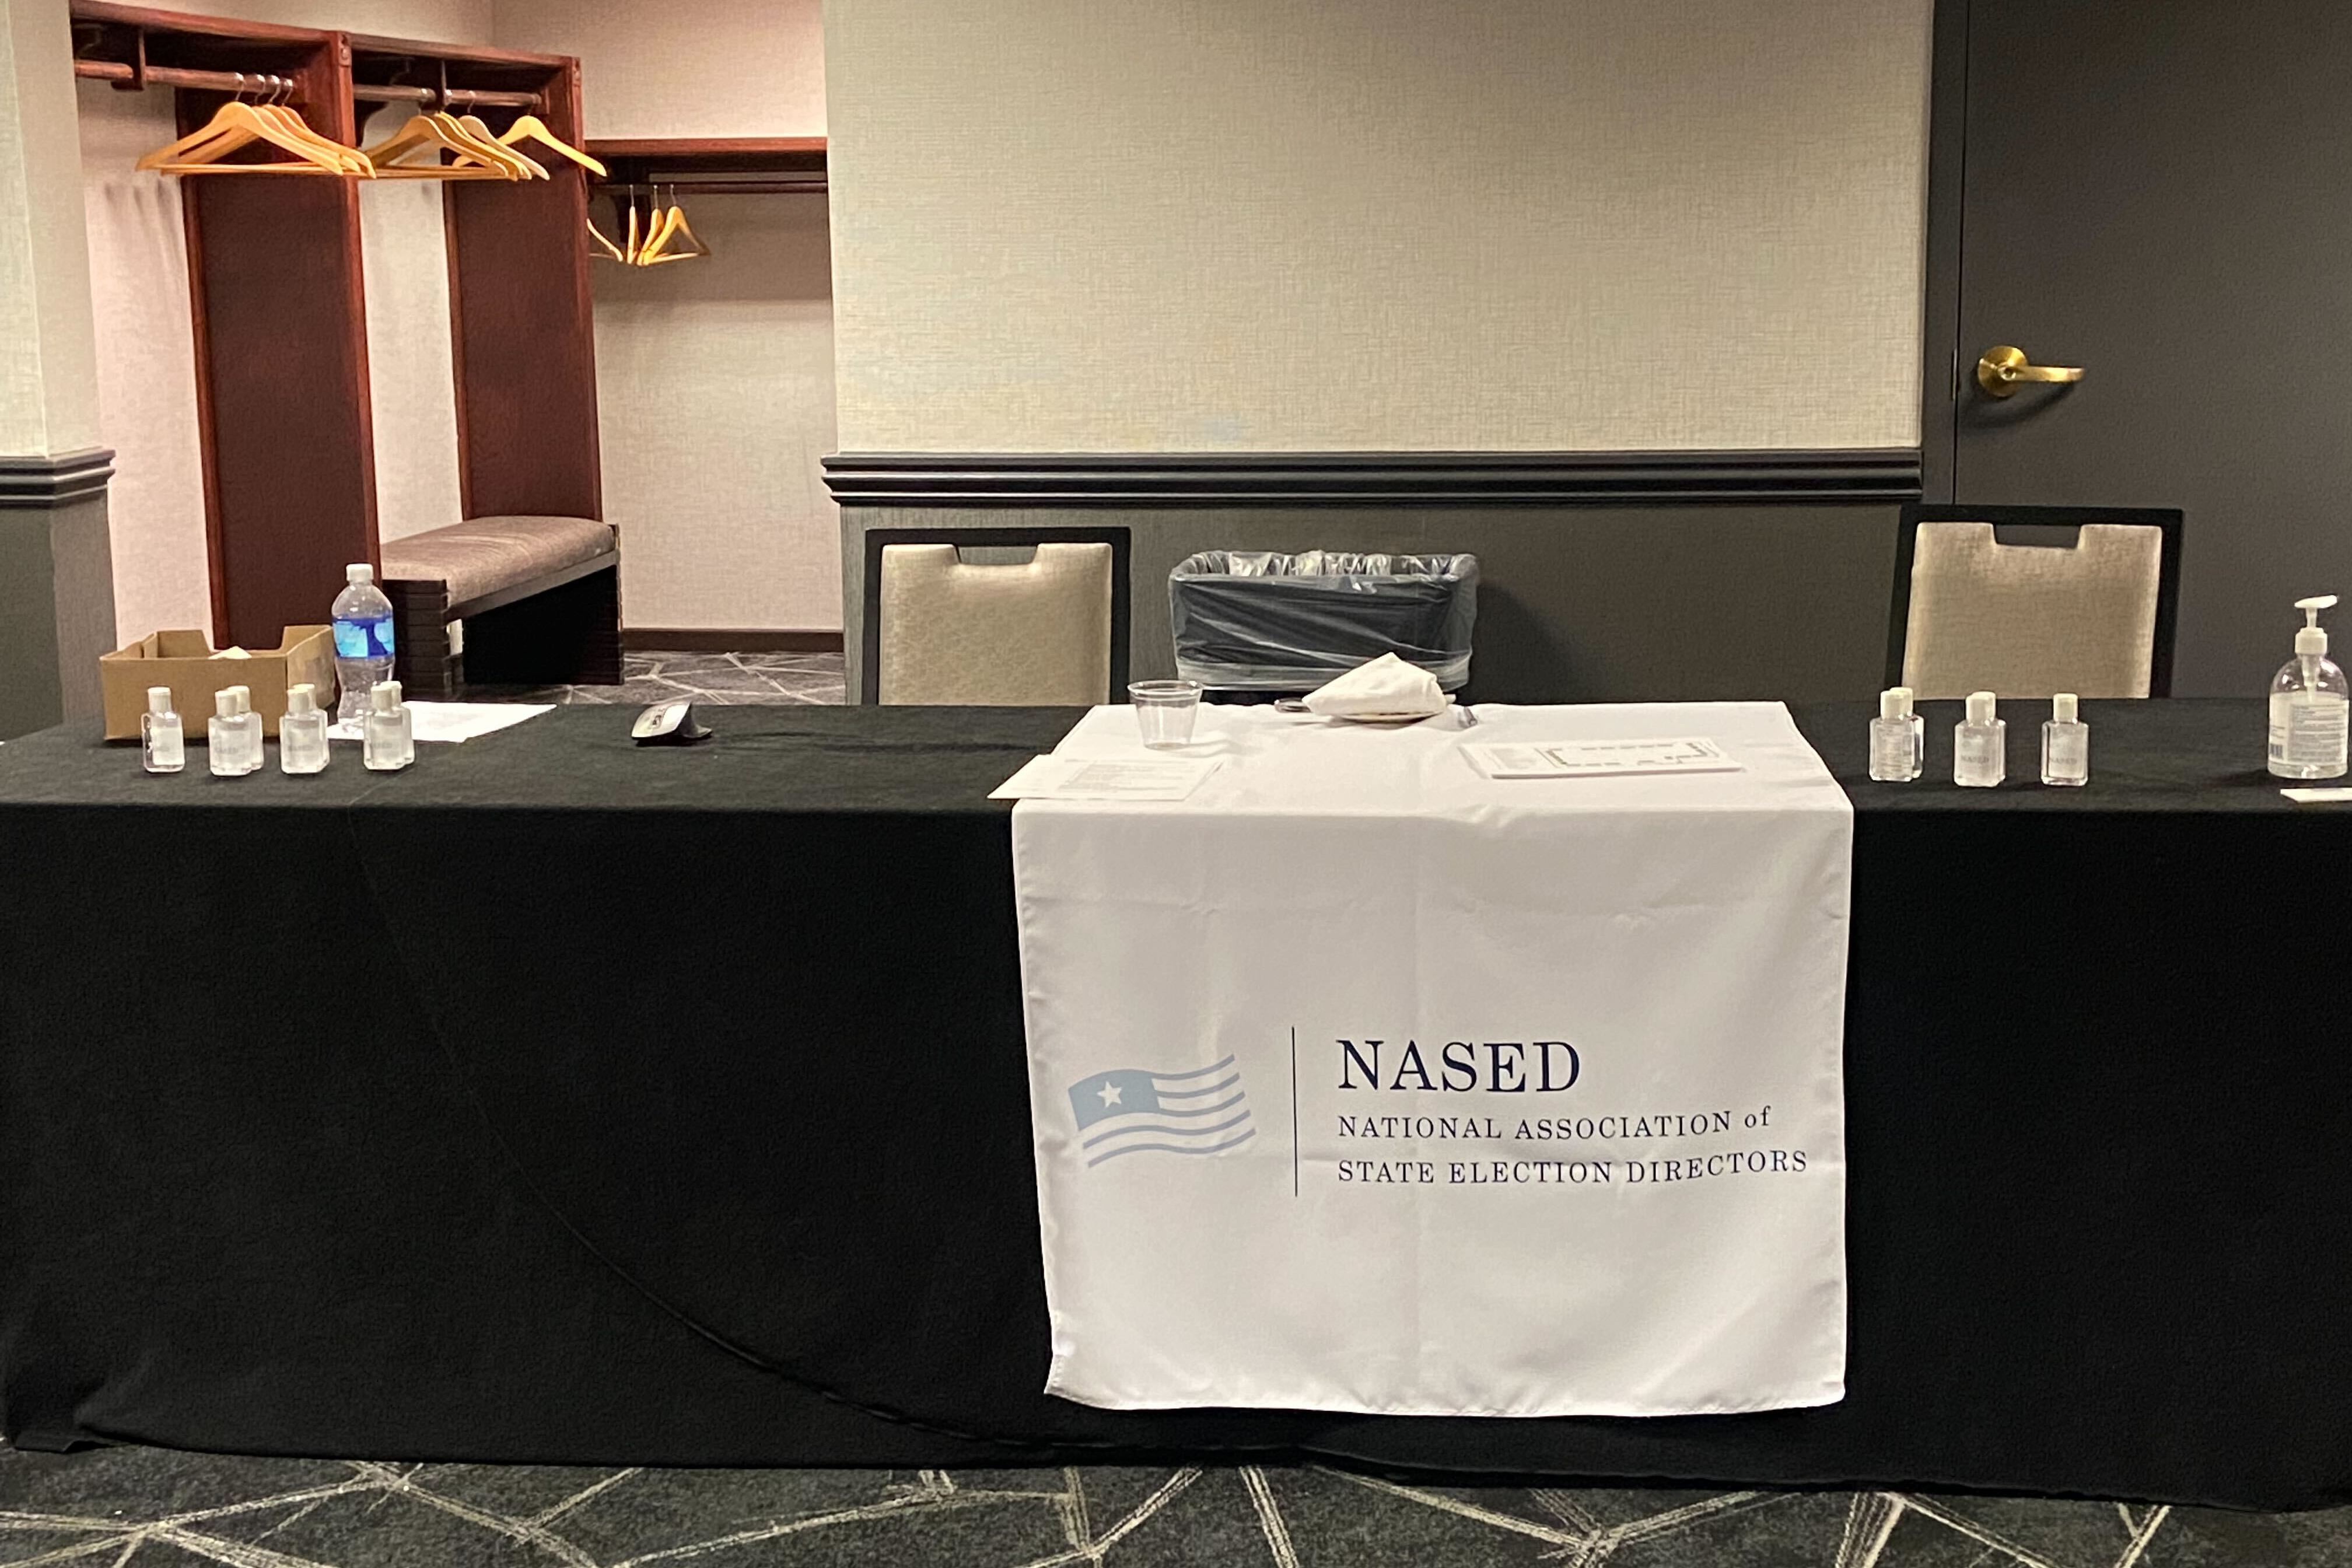 Water bottles and hand sanitizer sit on an empty table covered in a black tablecloth with a white banner reading “NASED - National Association of State Election Directors.”